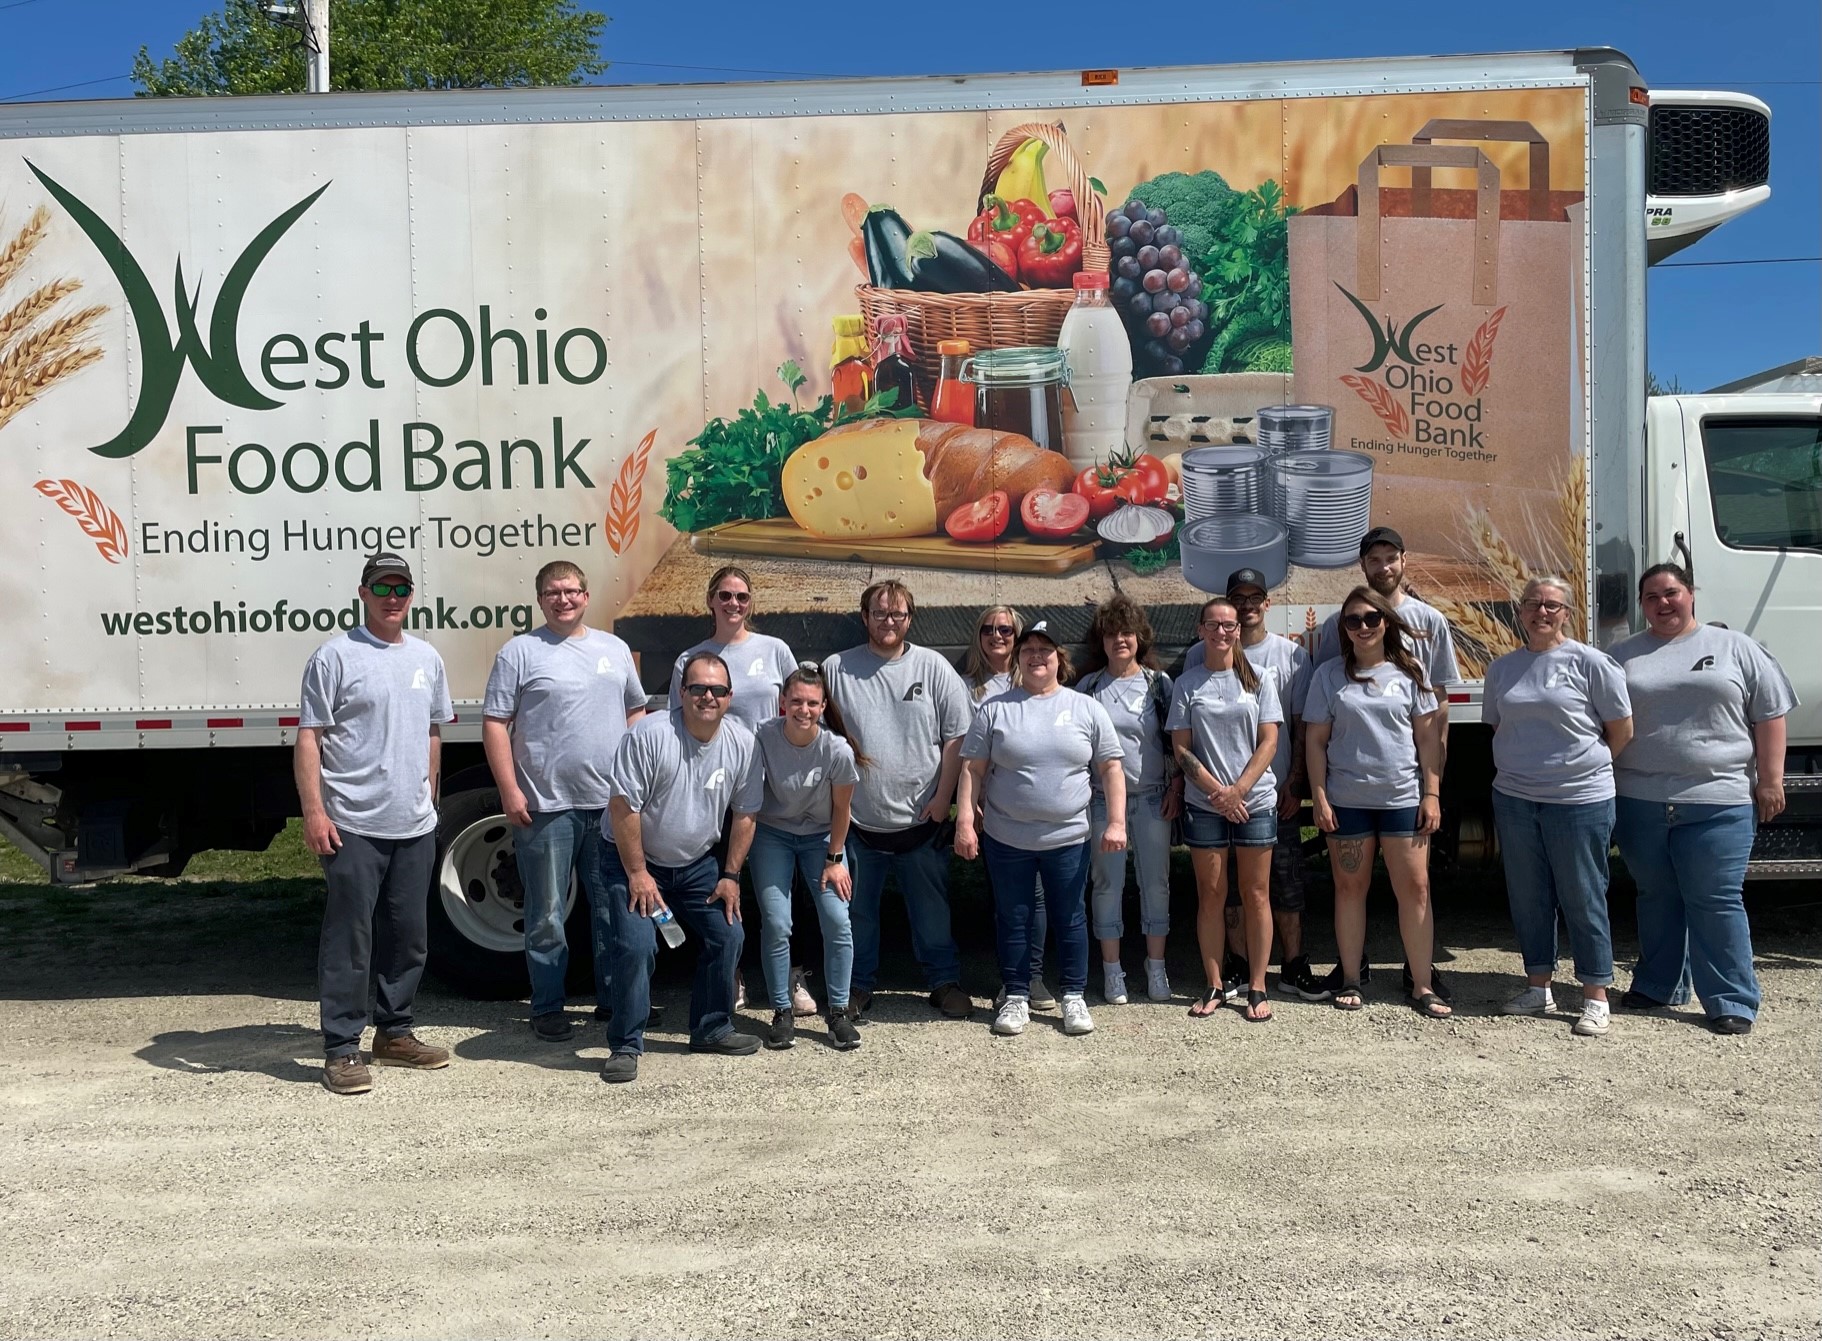 THE FREMONT COMPANY HOSTS WEST OHIO FOOD BANK MOBILE DISTRIBUTION EVENT